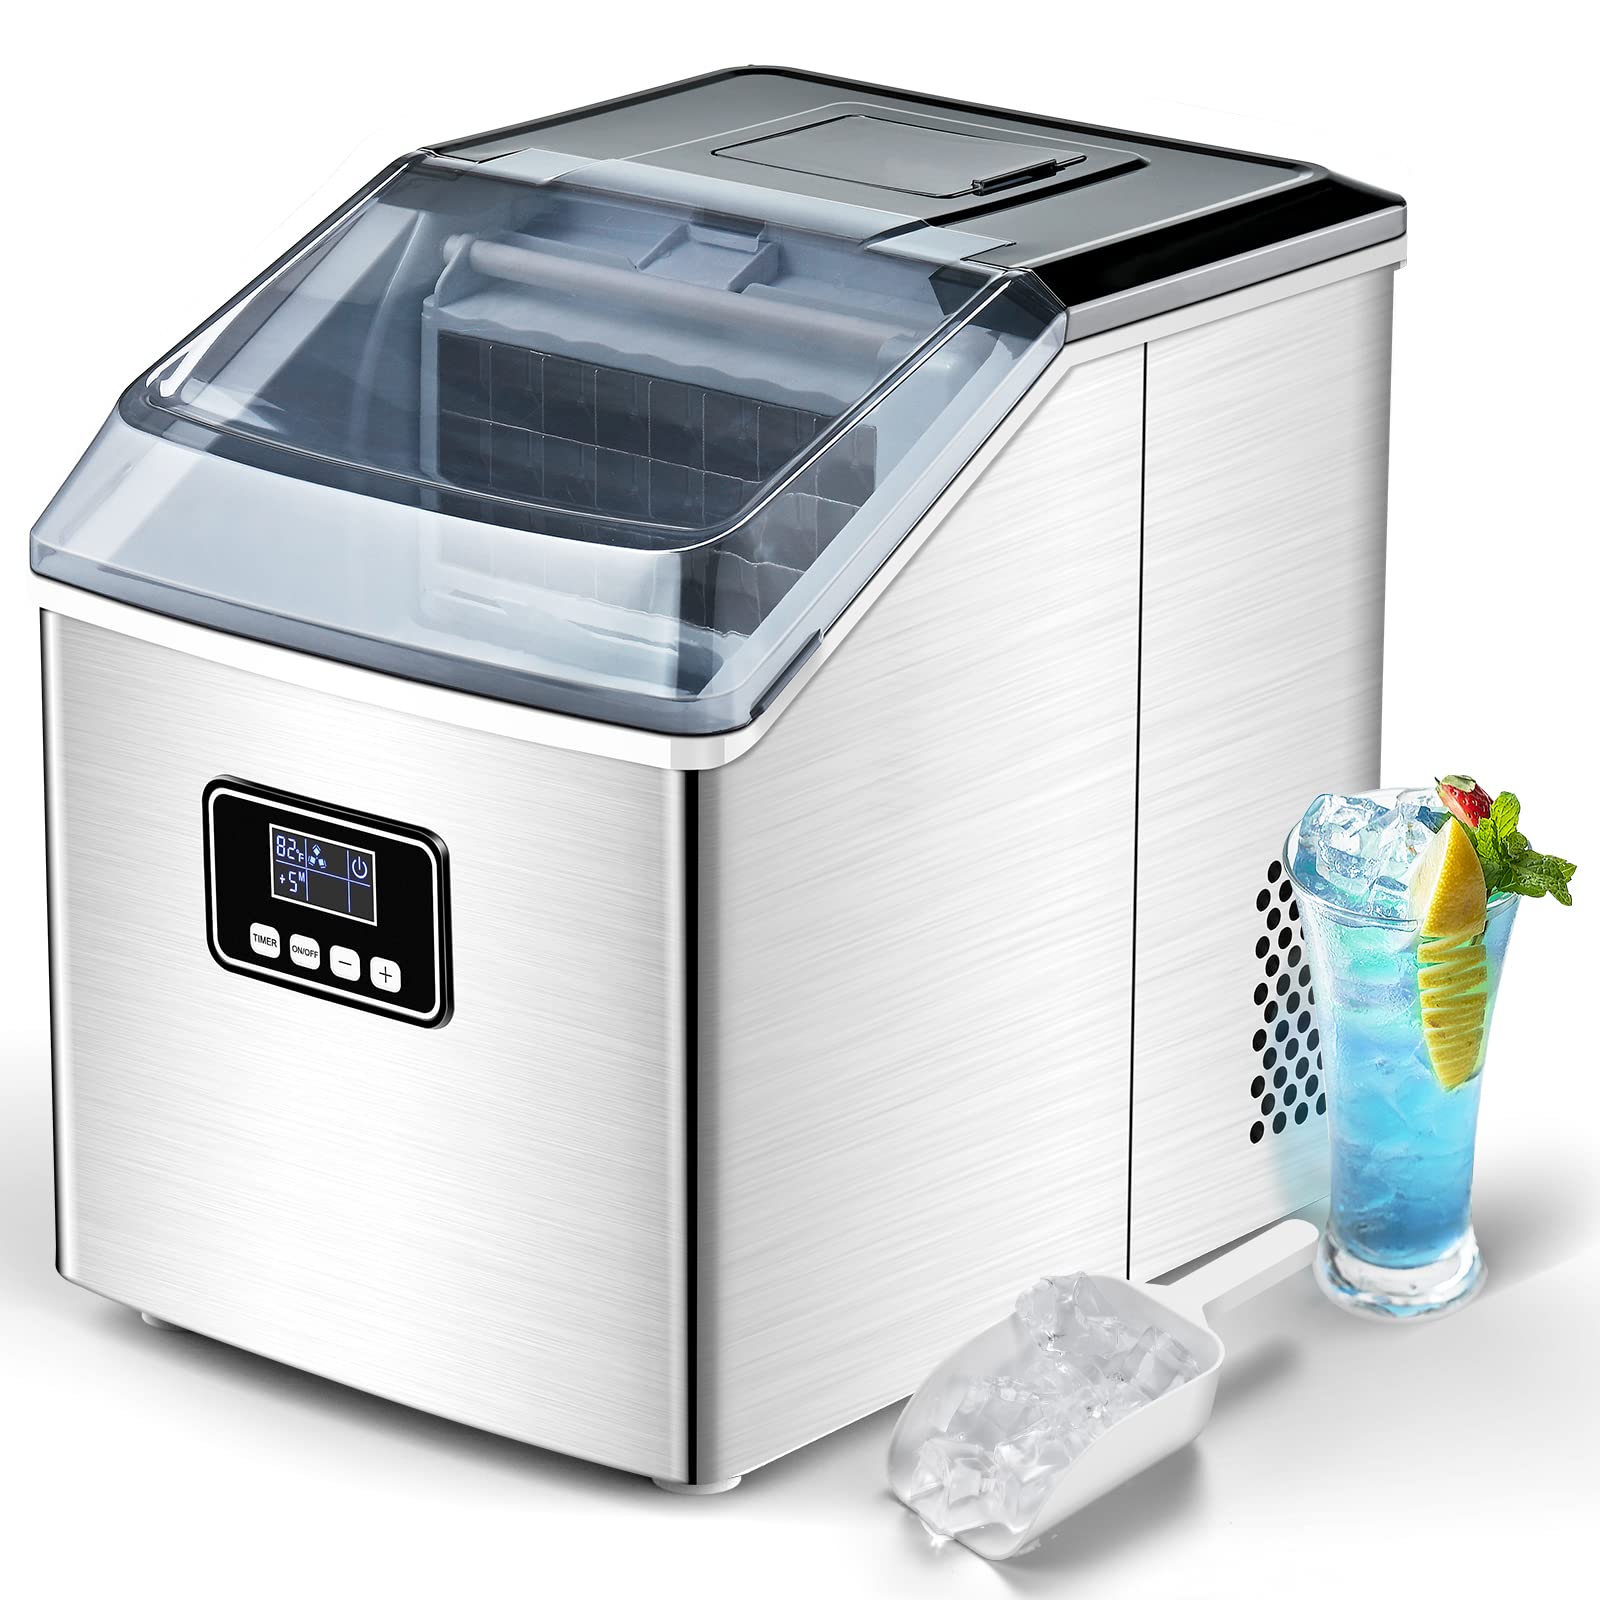  FREE VILLAGE Ice Maker Countertop - 40Lbs/24H Auto Self-Cleaning, 24 Ice Cubes in 13 Mins, Portable Ice Maker Machine, Compact Ice Maker with Ice Scoop & Basket, Ideal for Home Use/Party/Camping, Silver...